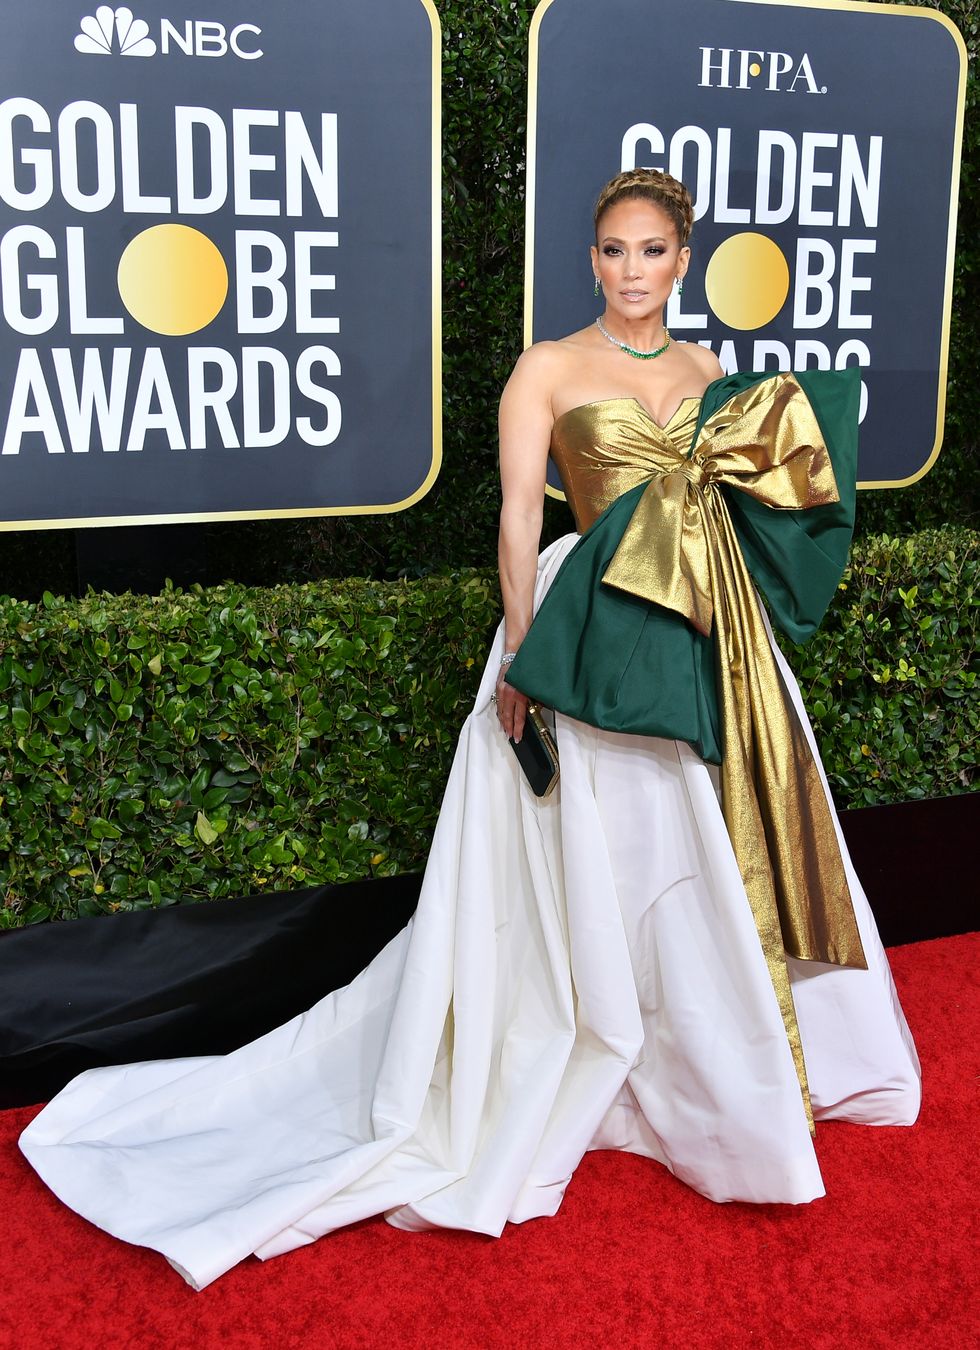 Jennifer Lopez Gives Us 'I, Robot' With Under Boob on the Red Carpet